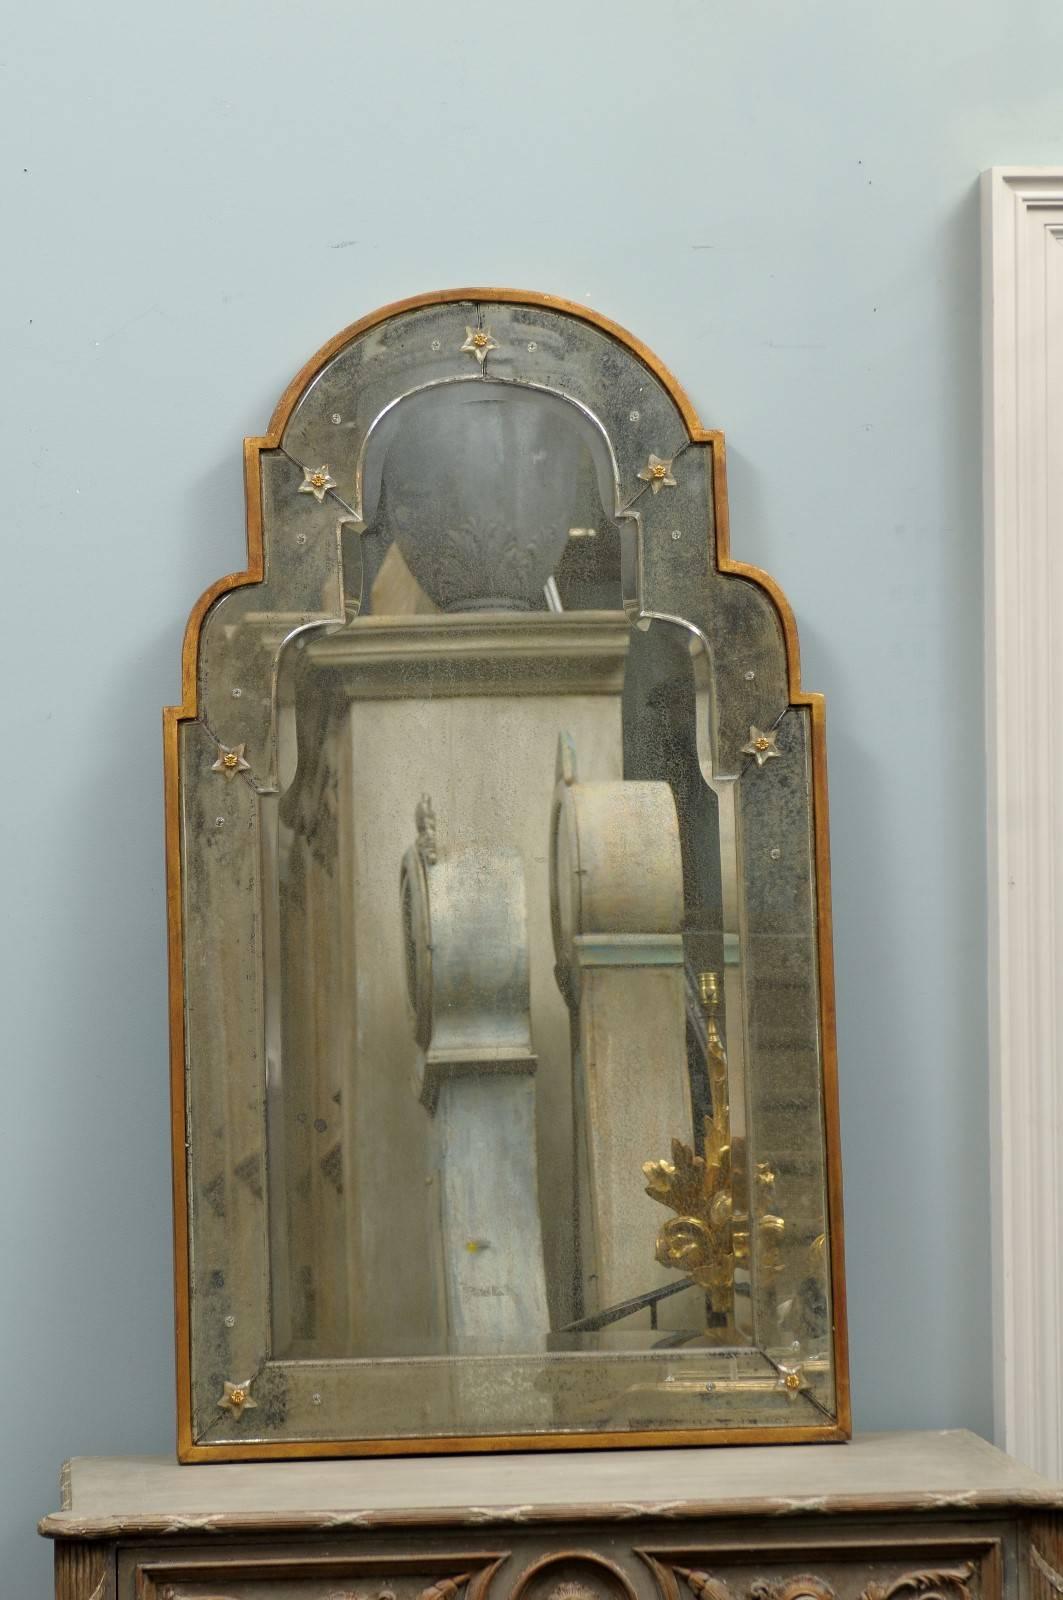 The Paris Venetian style mirror. This exquisite mirror entitled the 